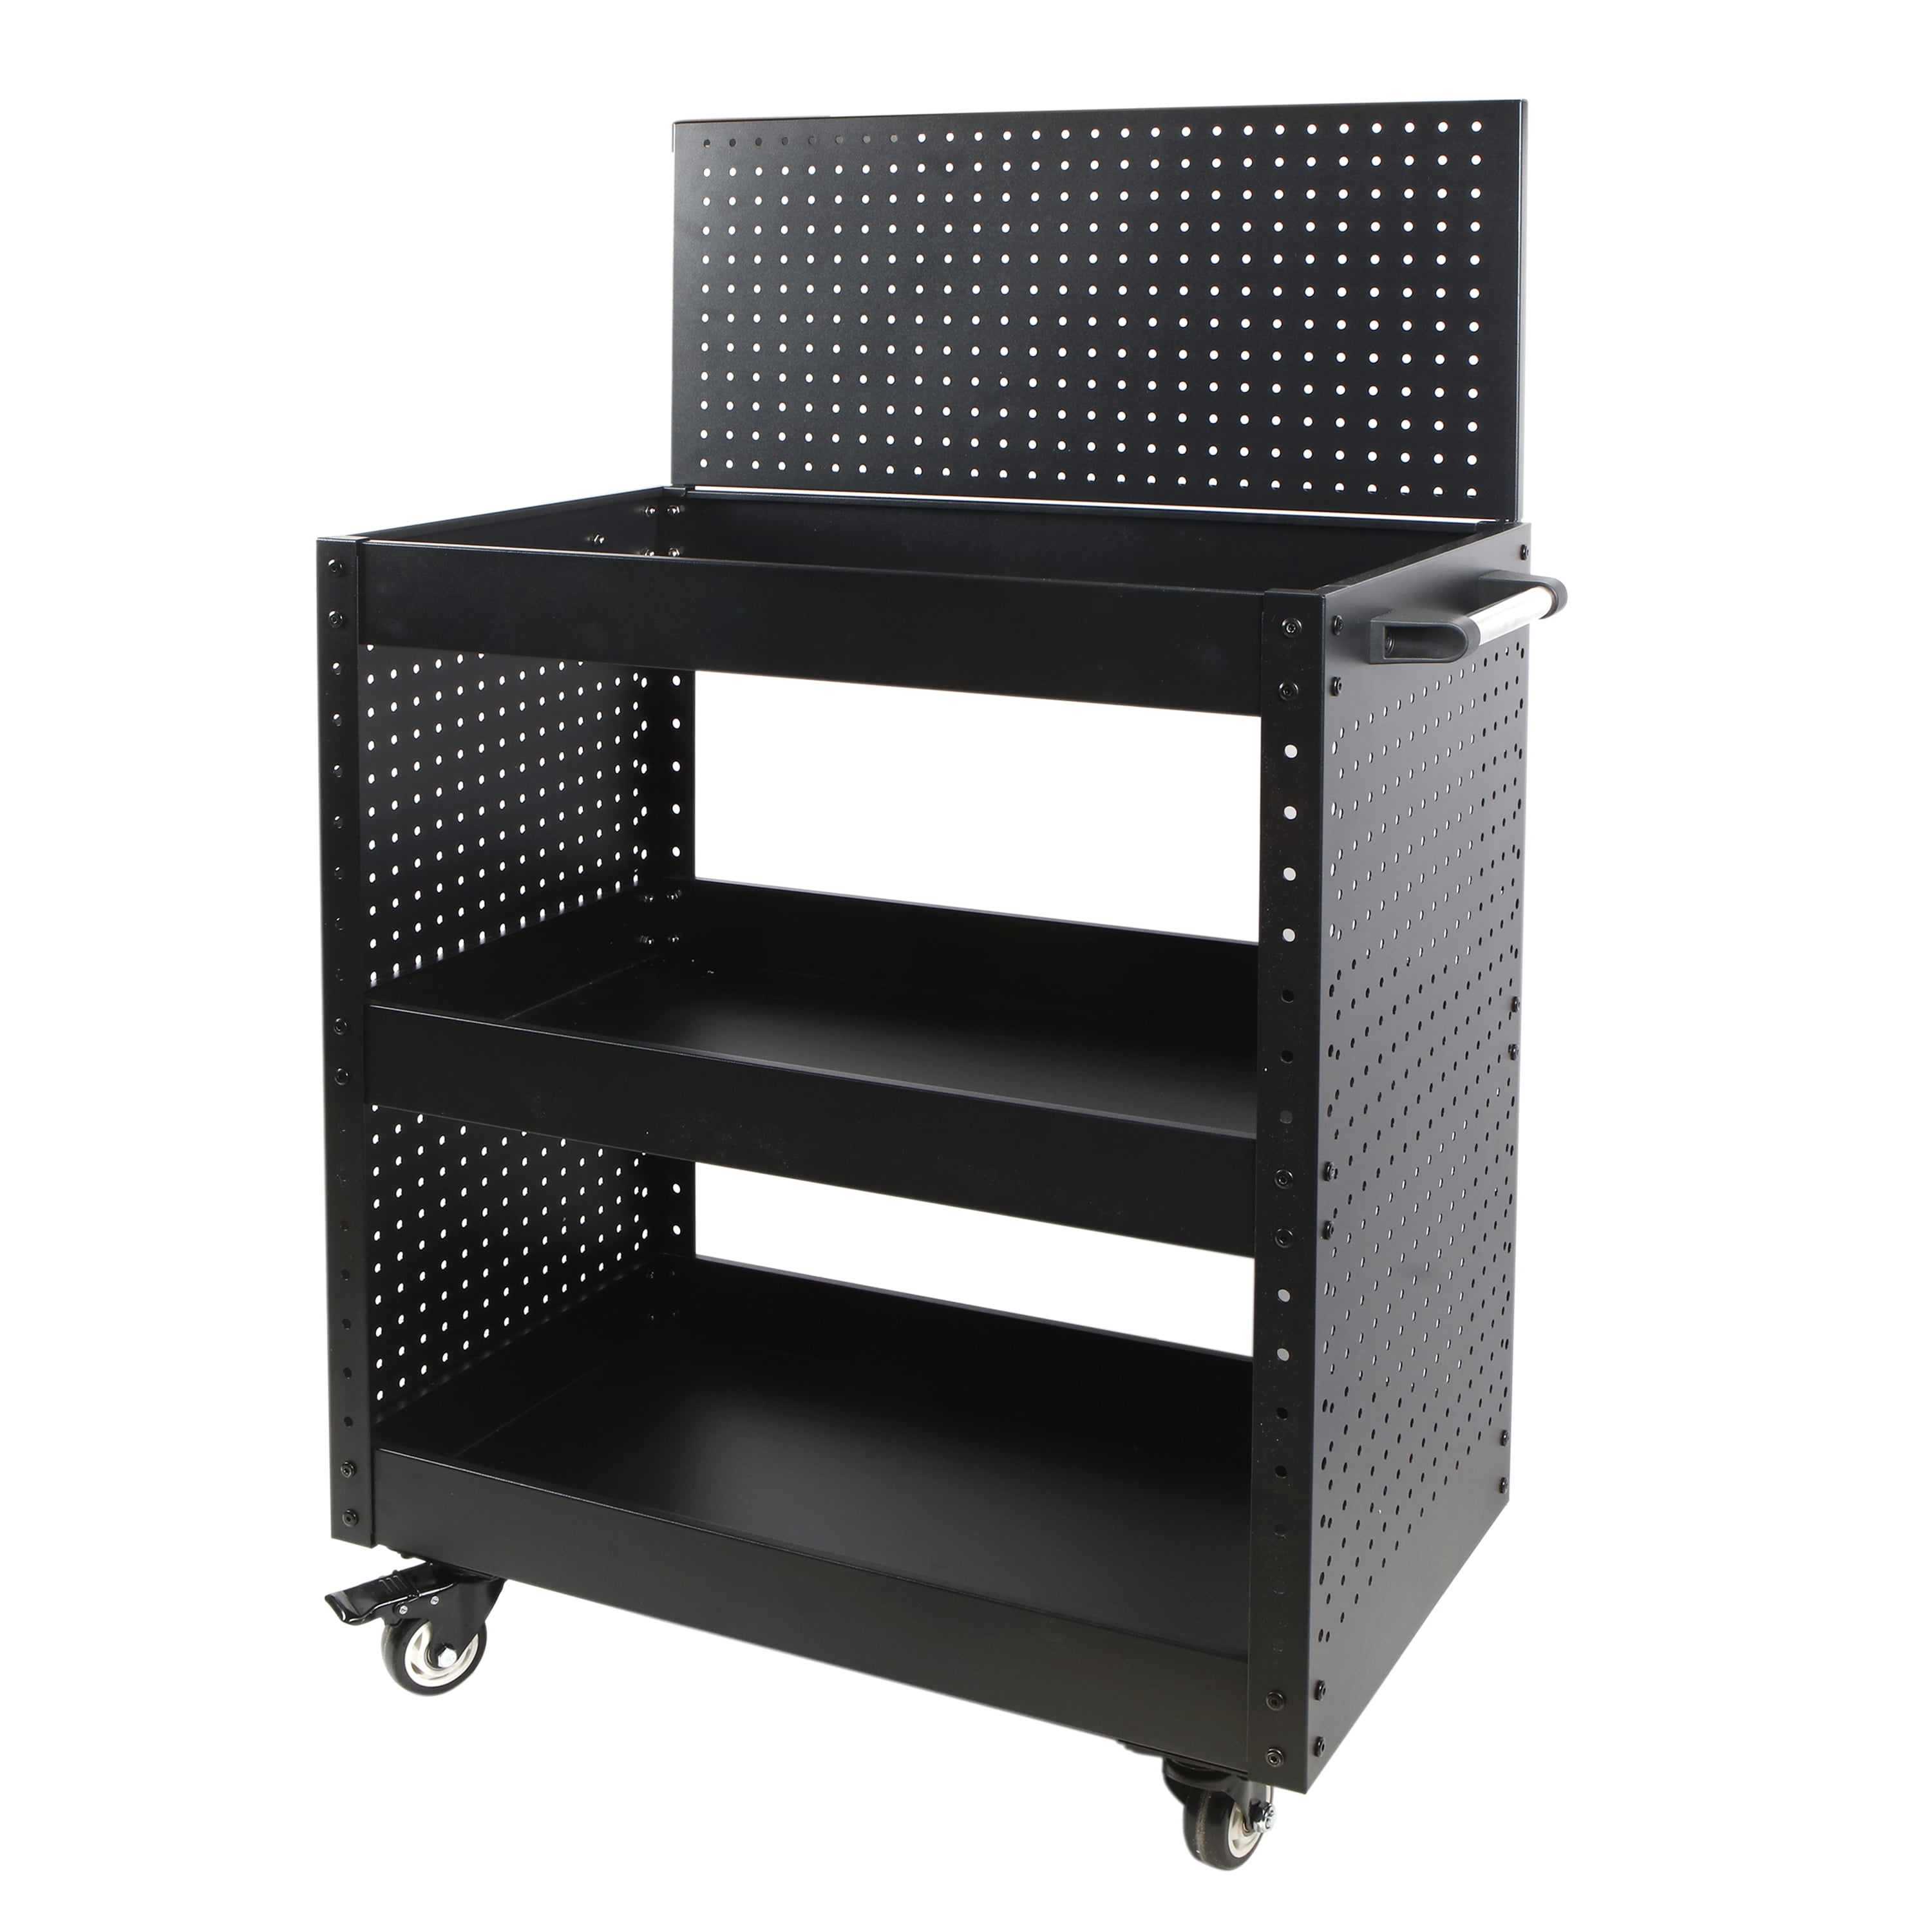 WORKPRO Rolling Service Utility Cart with Steel Pegboard Storage, Tool Cart - Walmart.com